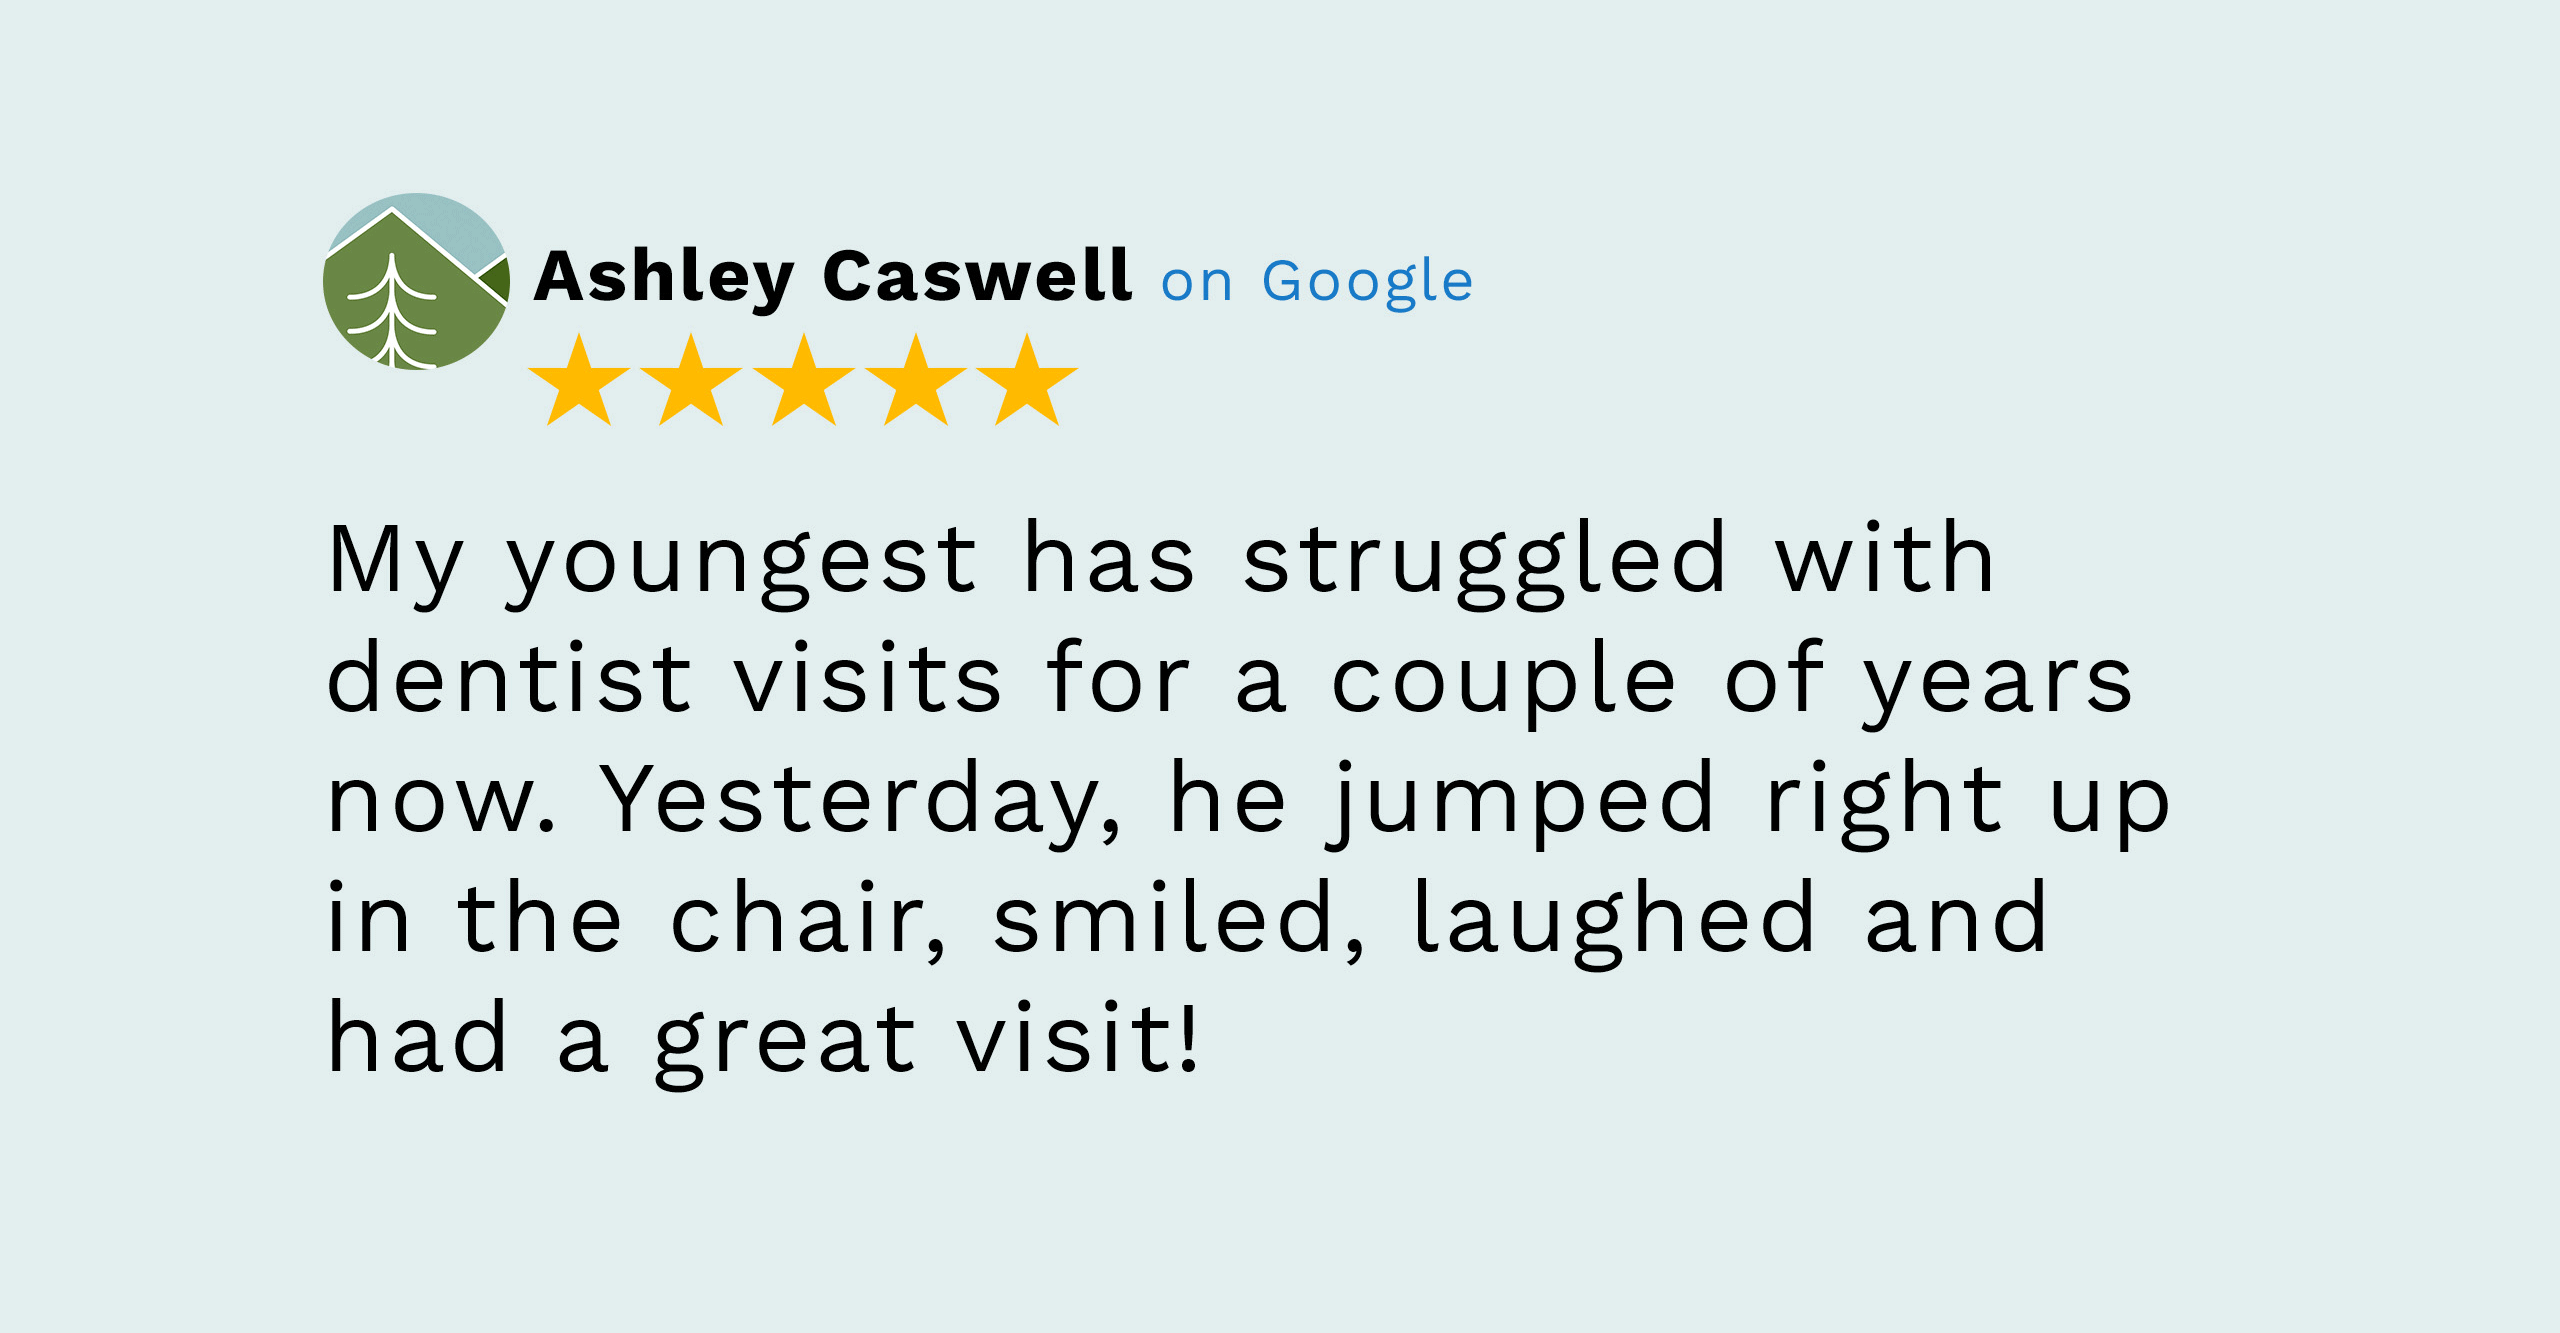 A decorative Google Review graphic with 5 stars and the name Ashley Caswell.